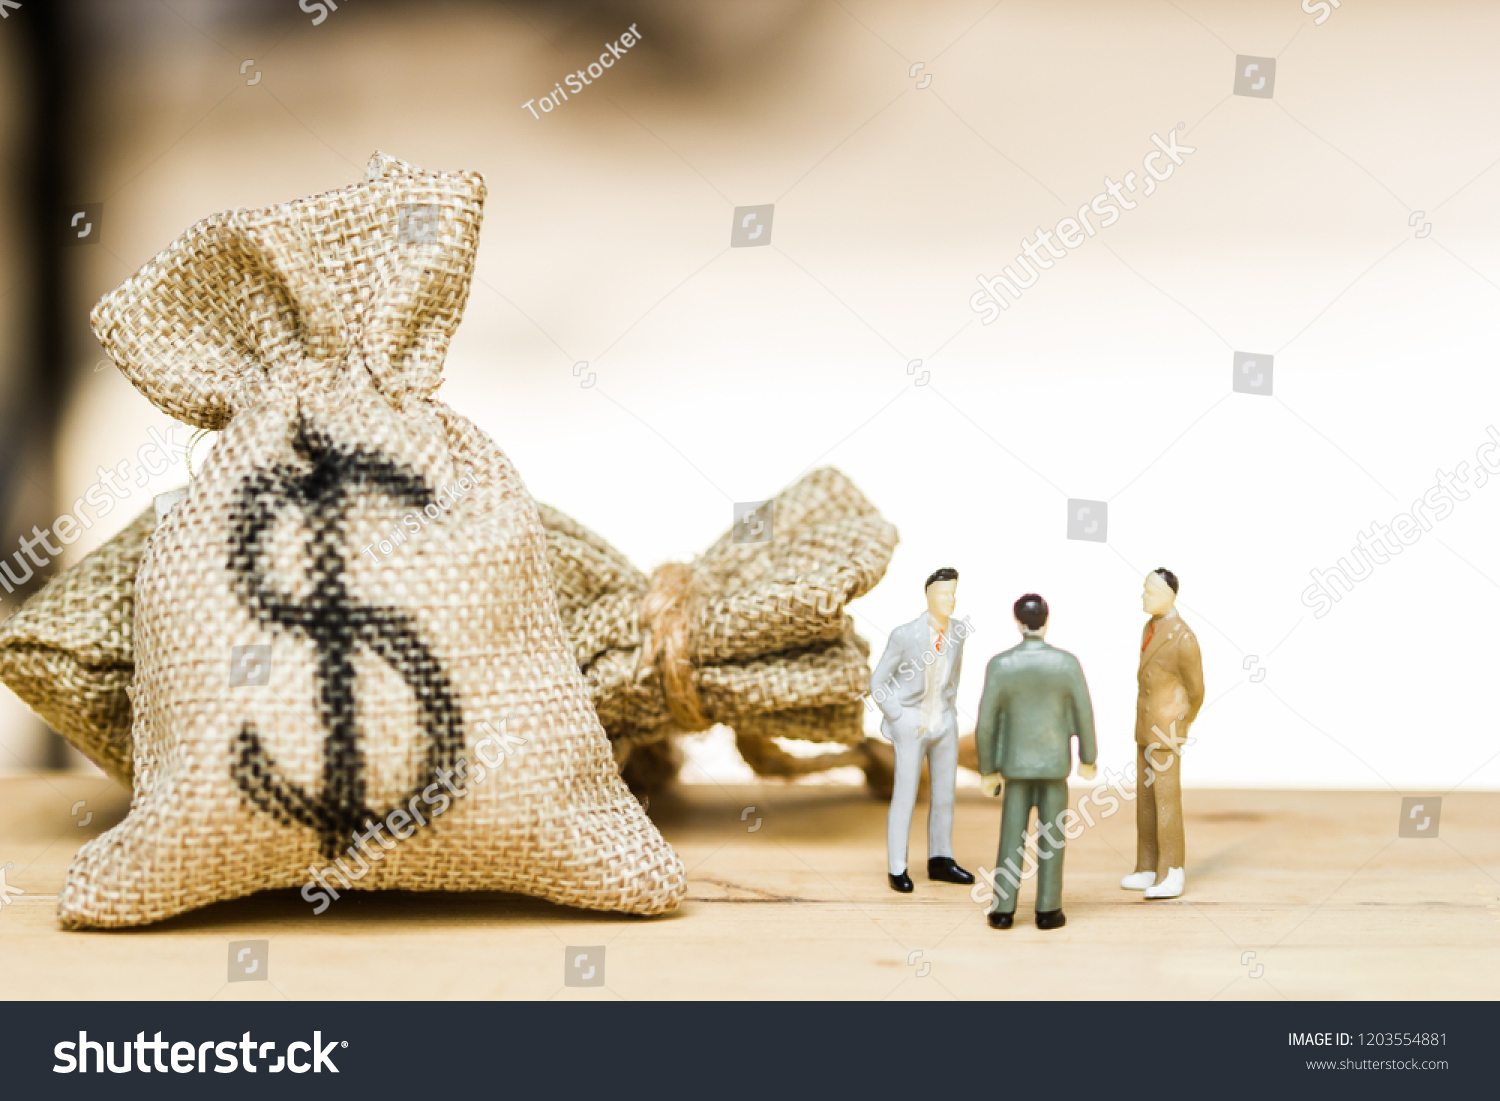 Financial investment negotiation,discussion among CEO or execute level concept: Miniature figurine three businessmen talk on money invest contract agreement, discuss about company direction in future. #1203554881